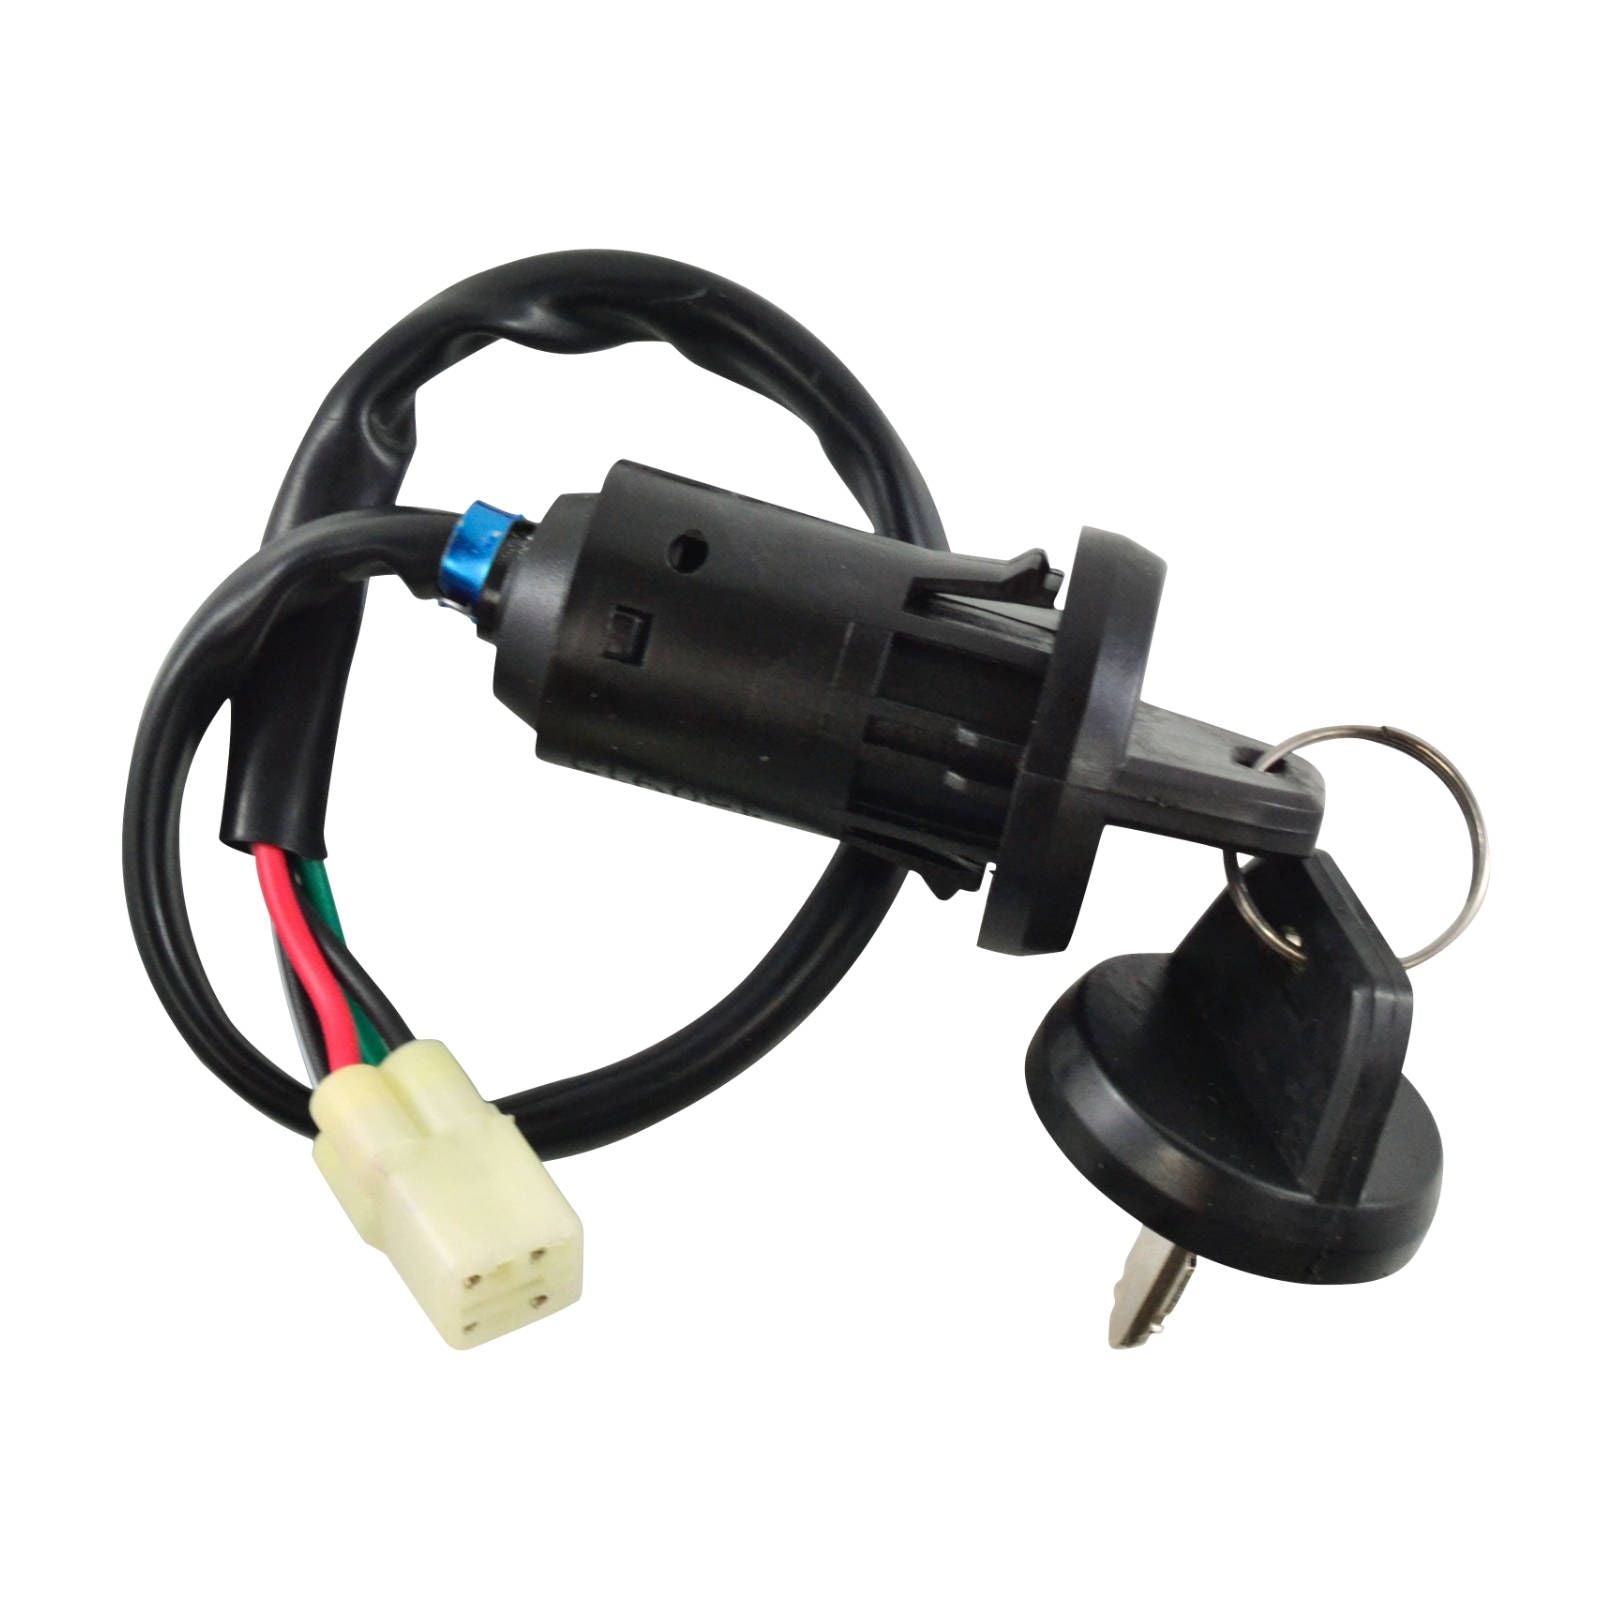 RMSTATOR 2-Position Ignition Key Switch - Assorted For Honda Models #RMS05013